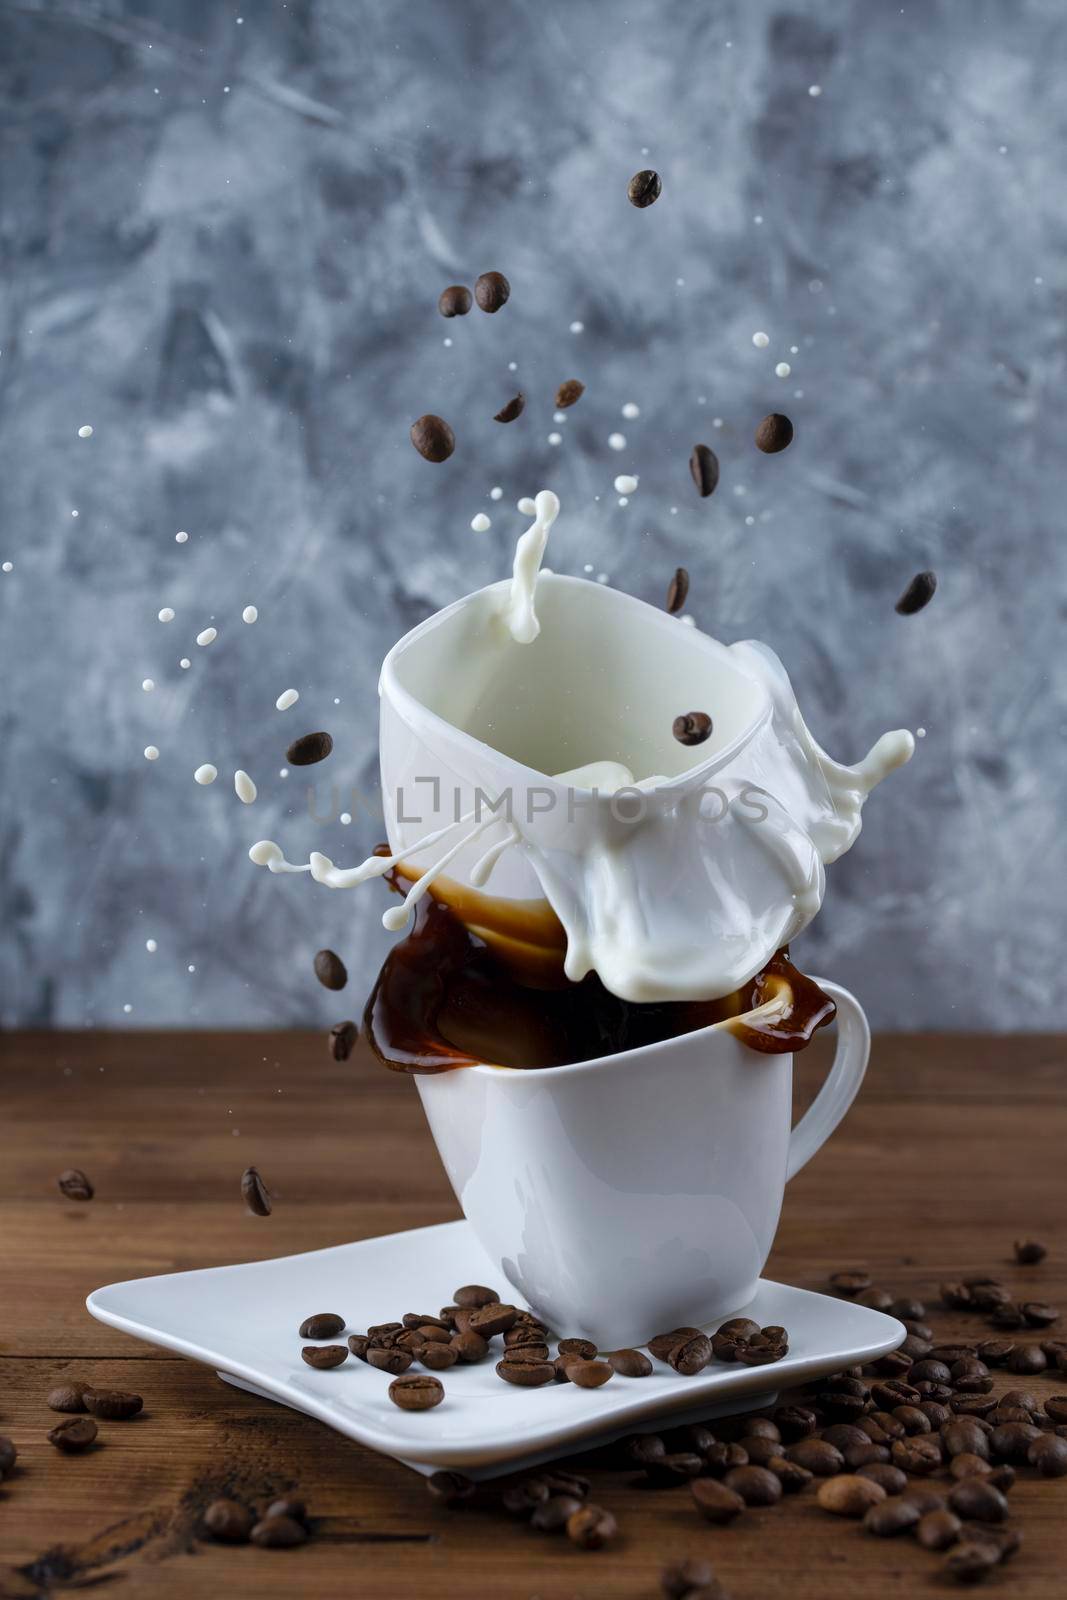 splash and splatter from a piece of sugar in a mug with coffee and mug with milk on a wooden background.